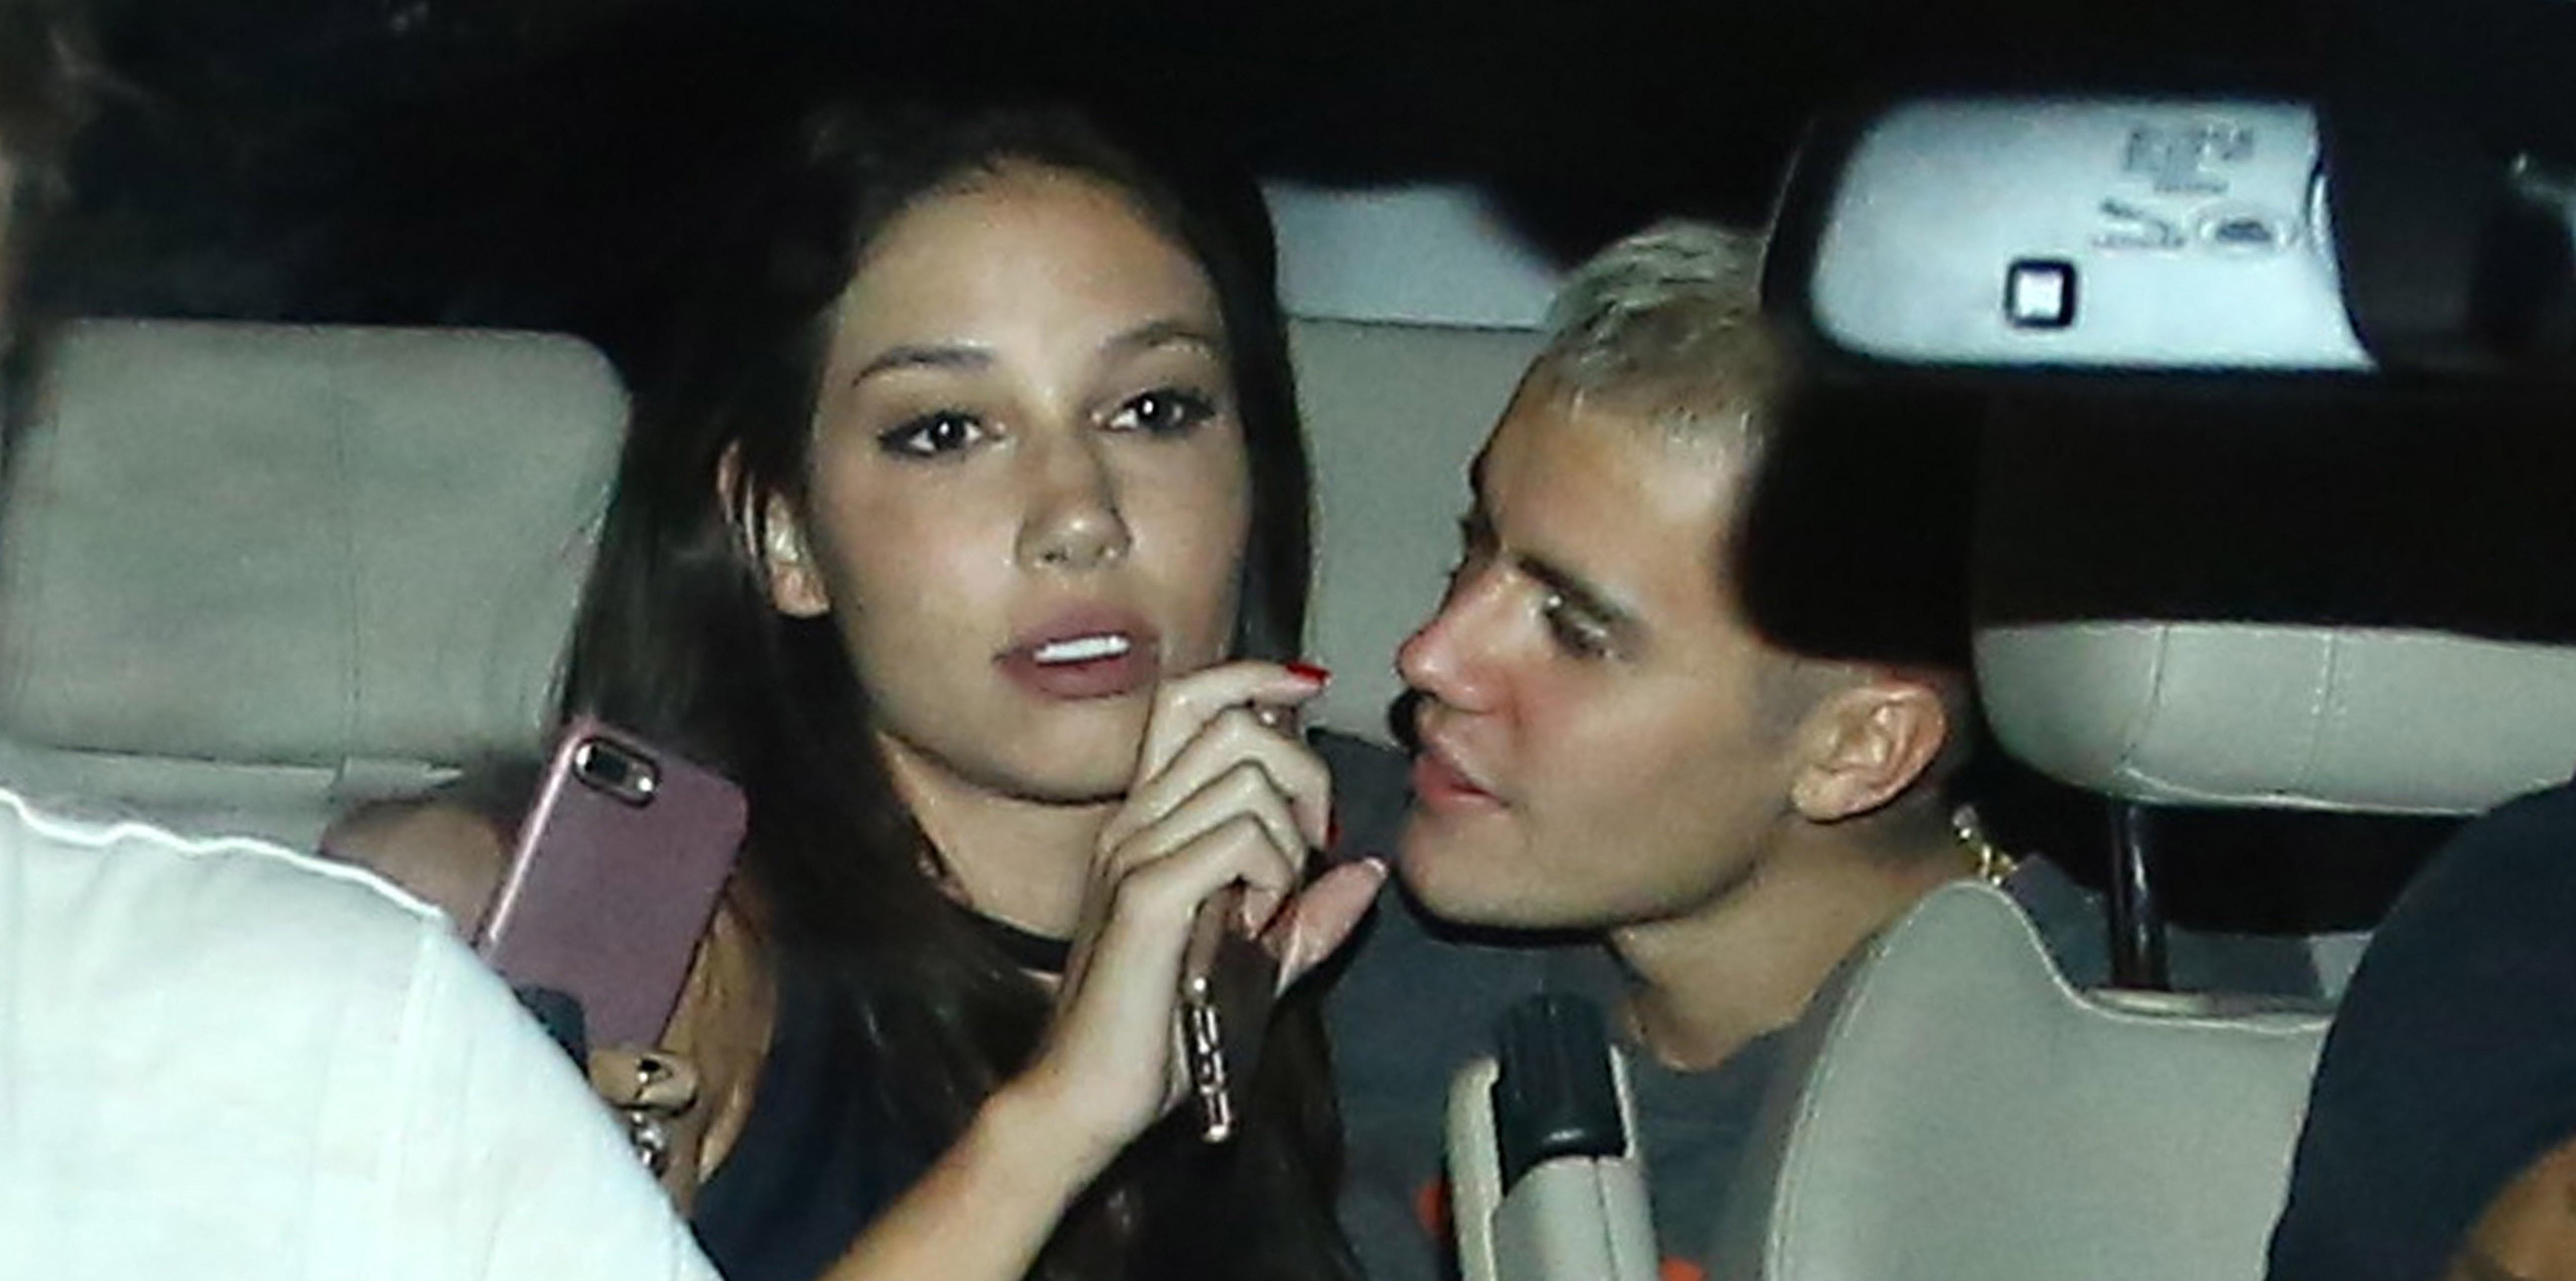 *EXCLUSIVE* Justin Bieber gets cozy with a girl as he exits his Rio hotel